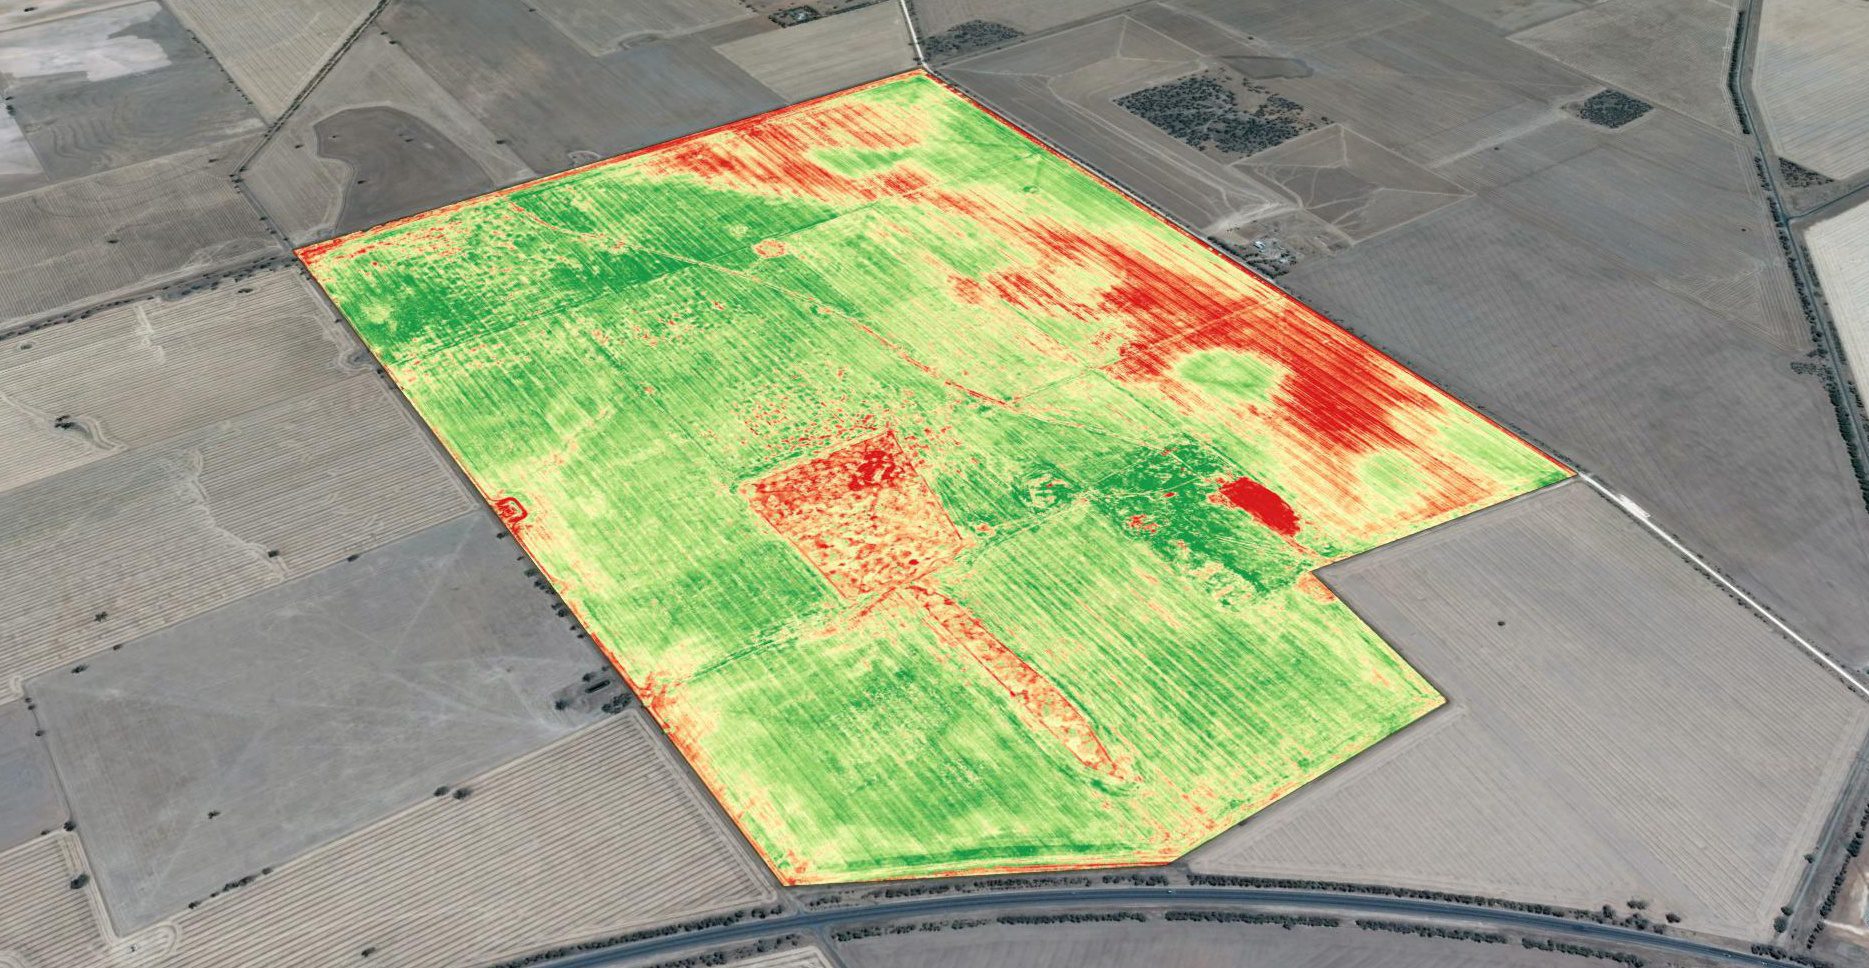 Drones and New Applications for Precision Agriculture